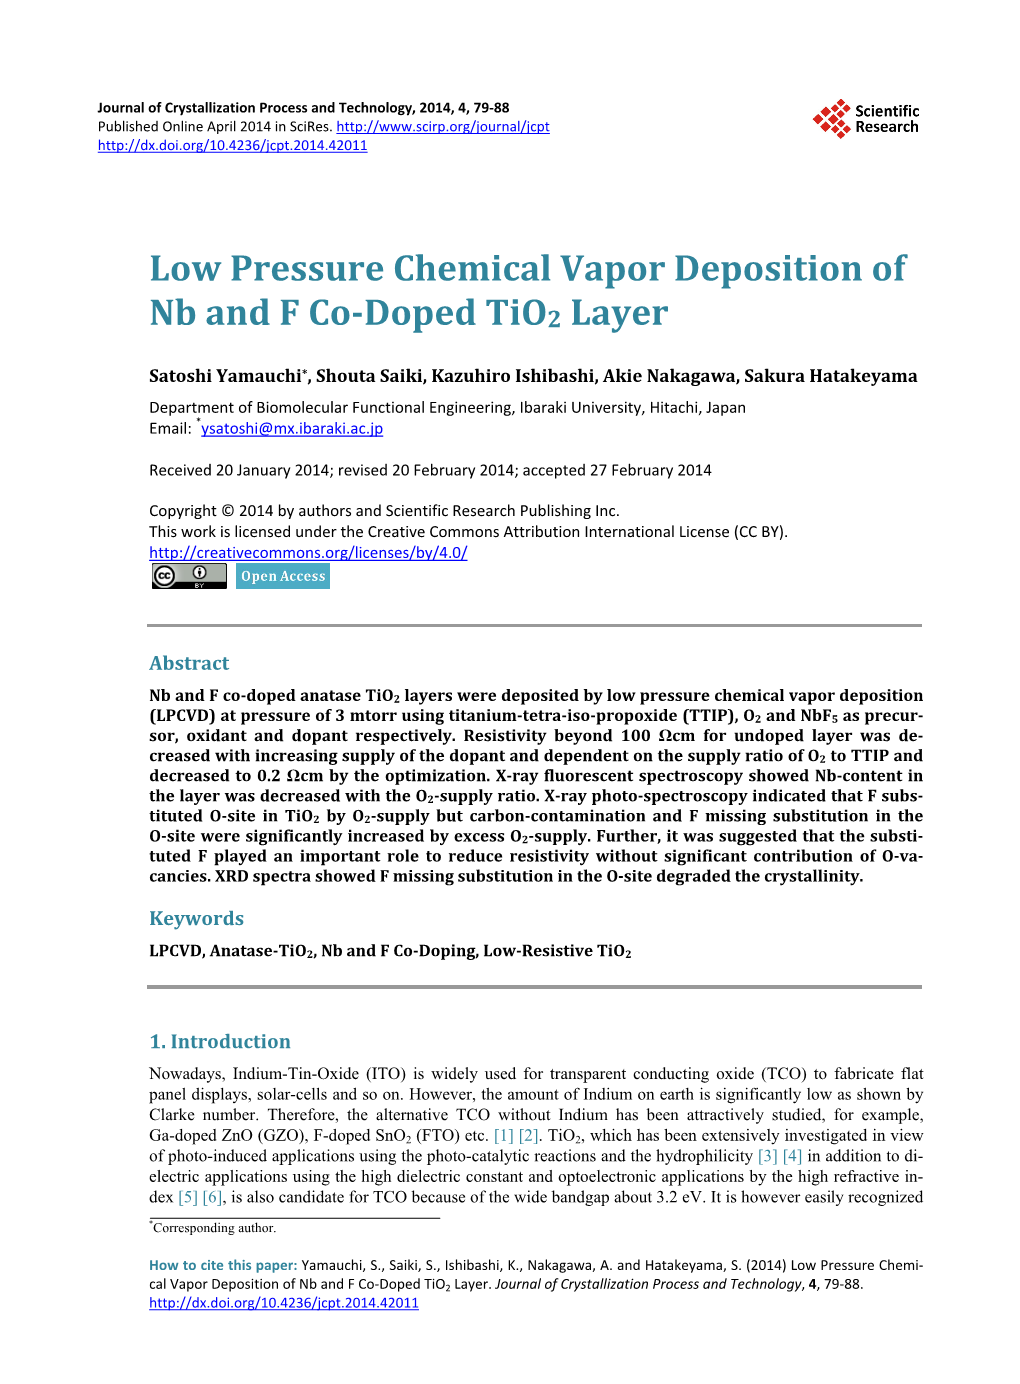 Low Pressure Chemical Vapor Deposition of Nb and F Co-Doped Tio2 Layer